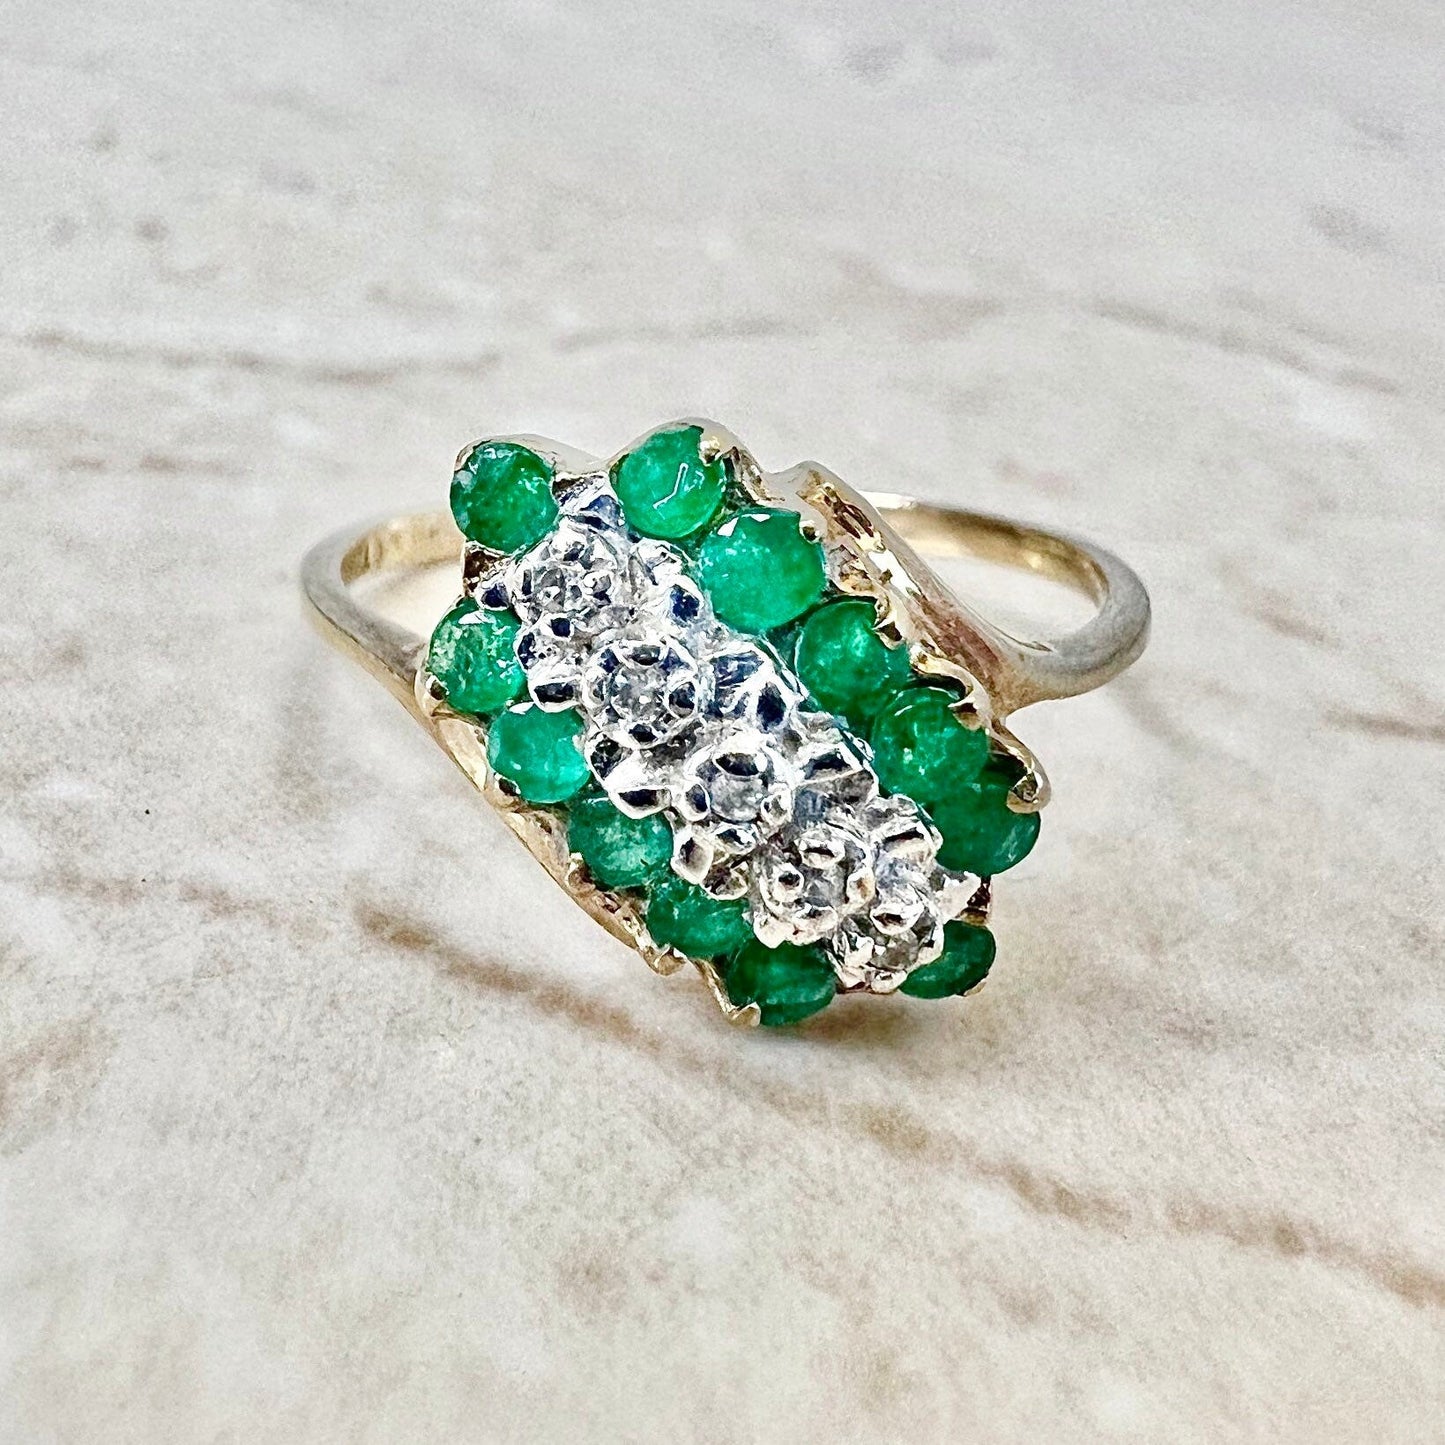 Vintage 10K Natural Emerald & Diamond Ring - 2 Tone Gold Emerald Cocktail Ring - Promise Ring - April May Birthstone - Best Gifts For Her